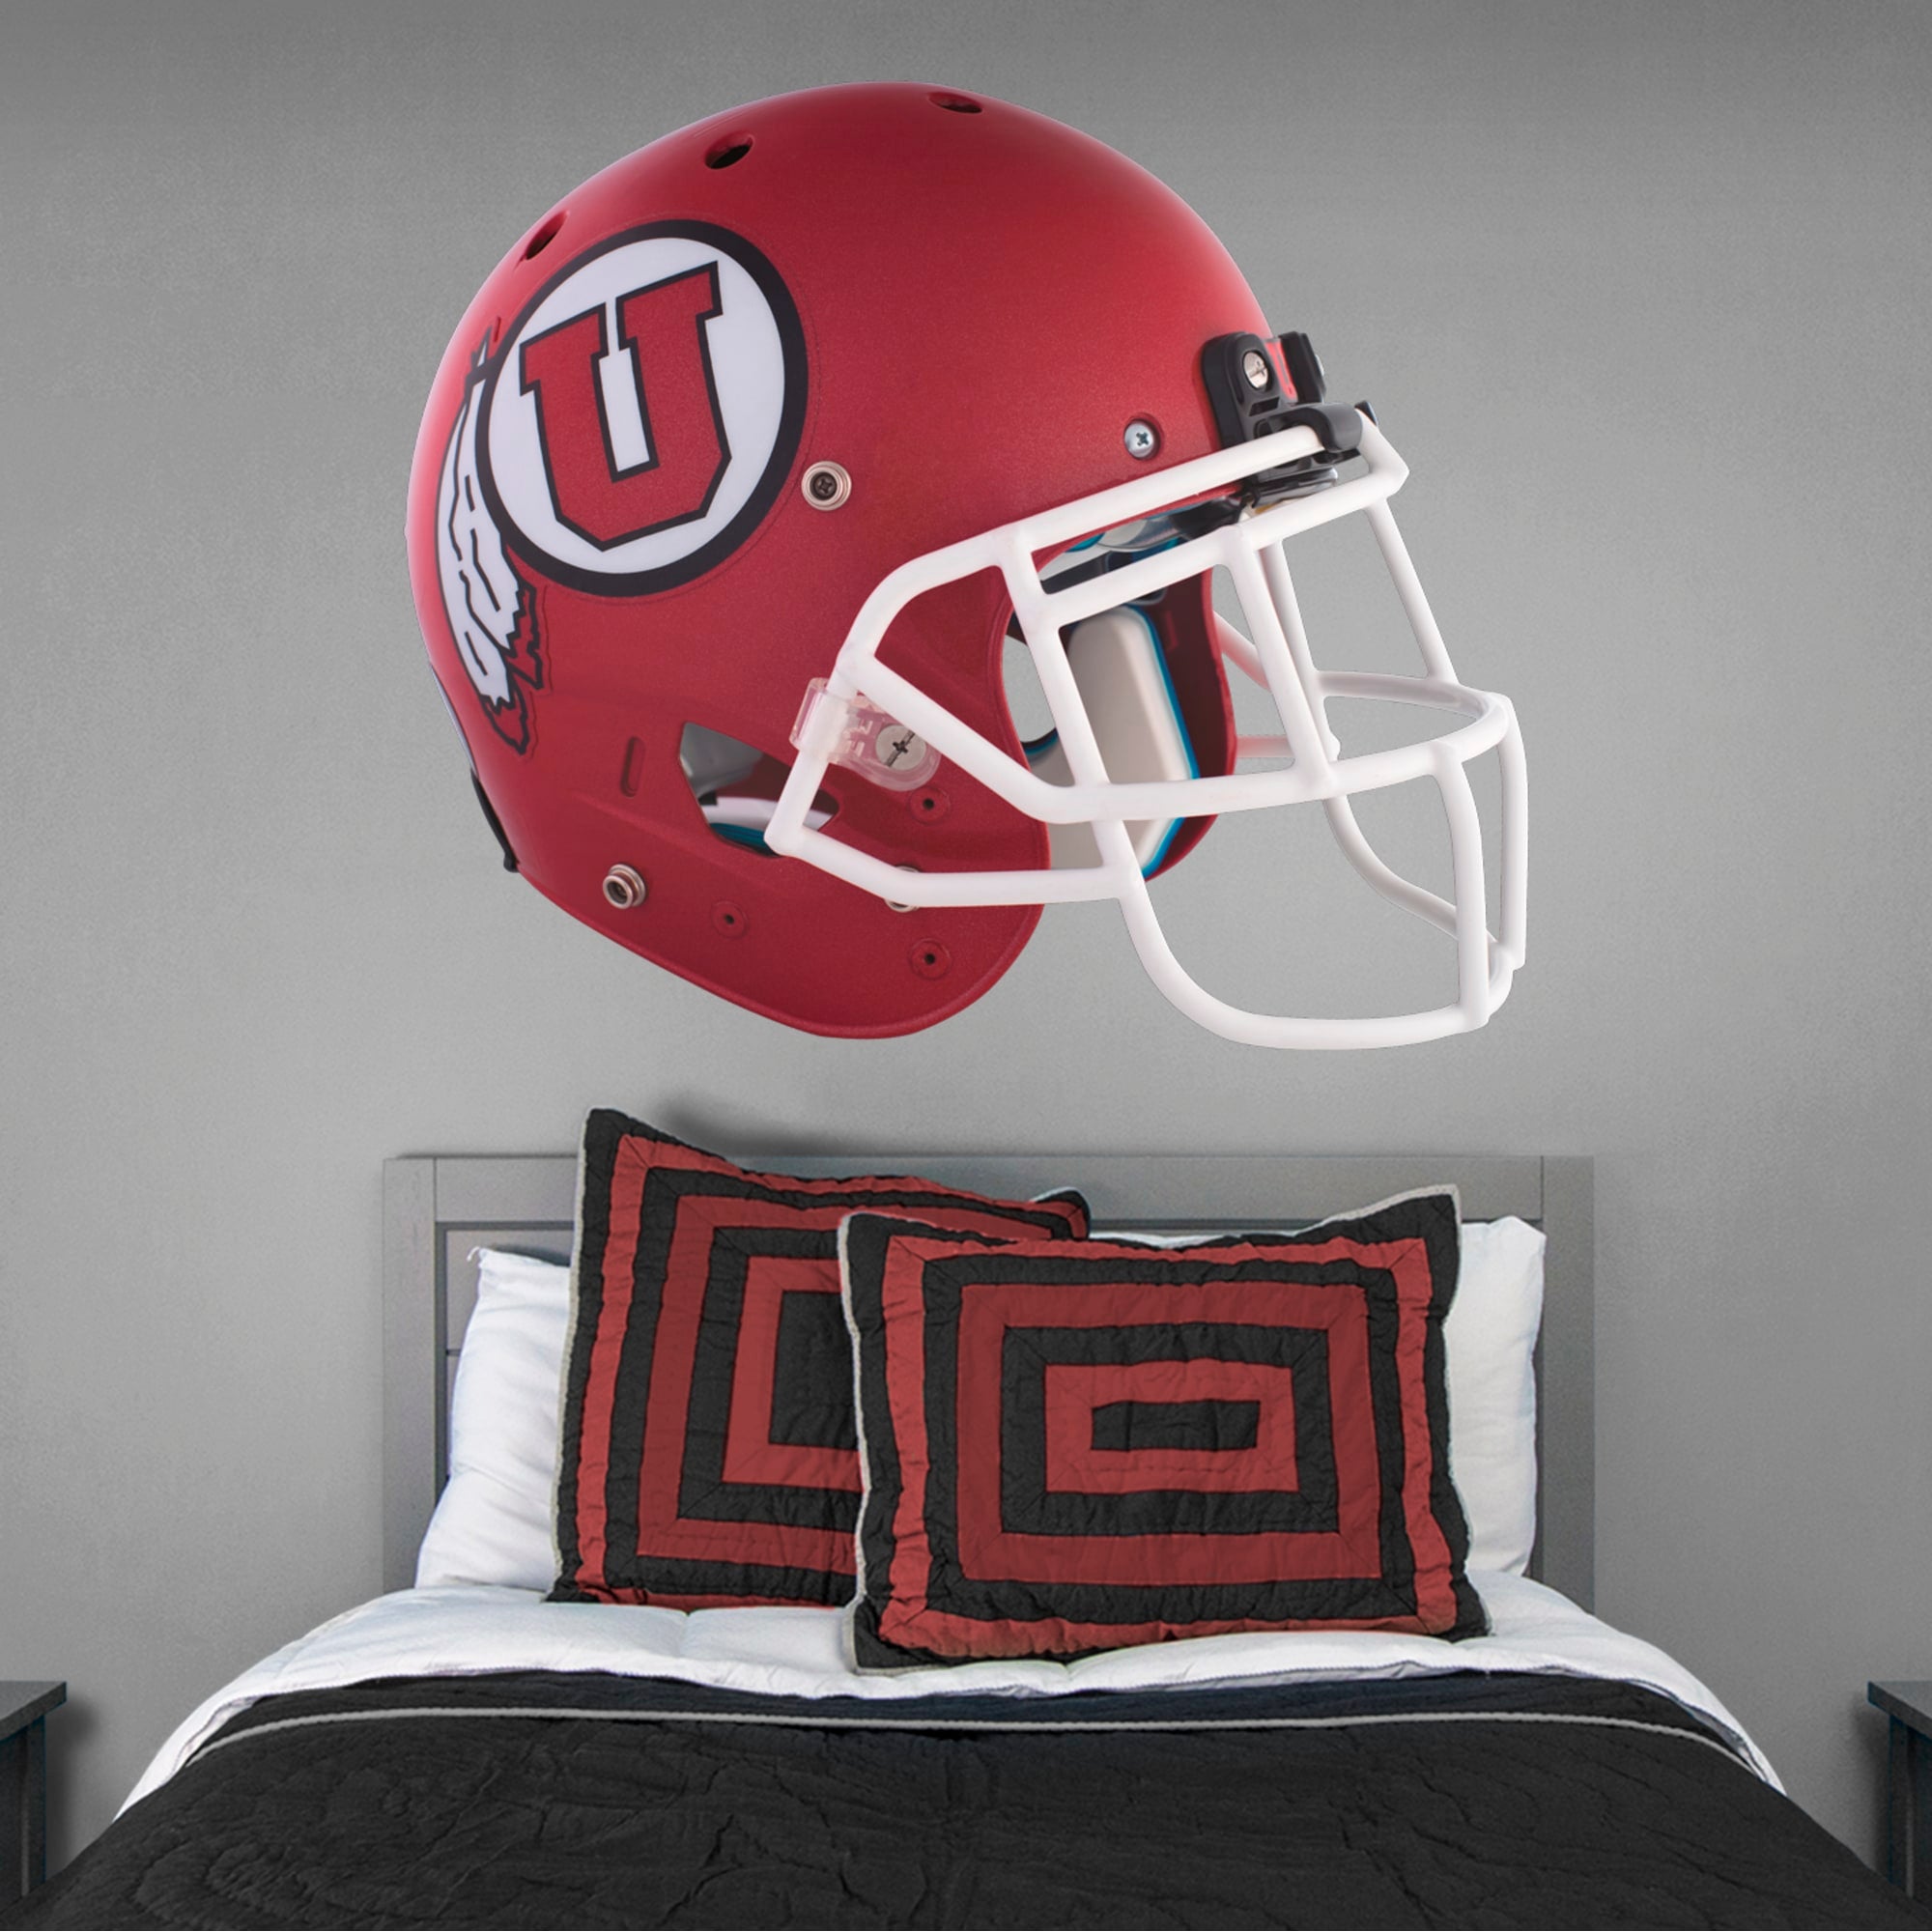 Utah Utes: Red Helmet - Officially Licensed Removable Wall Decal 56.0"W x 46.0"H by Fathead | Vinyl